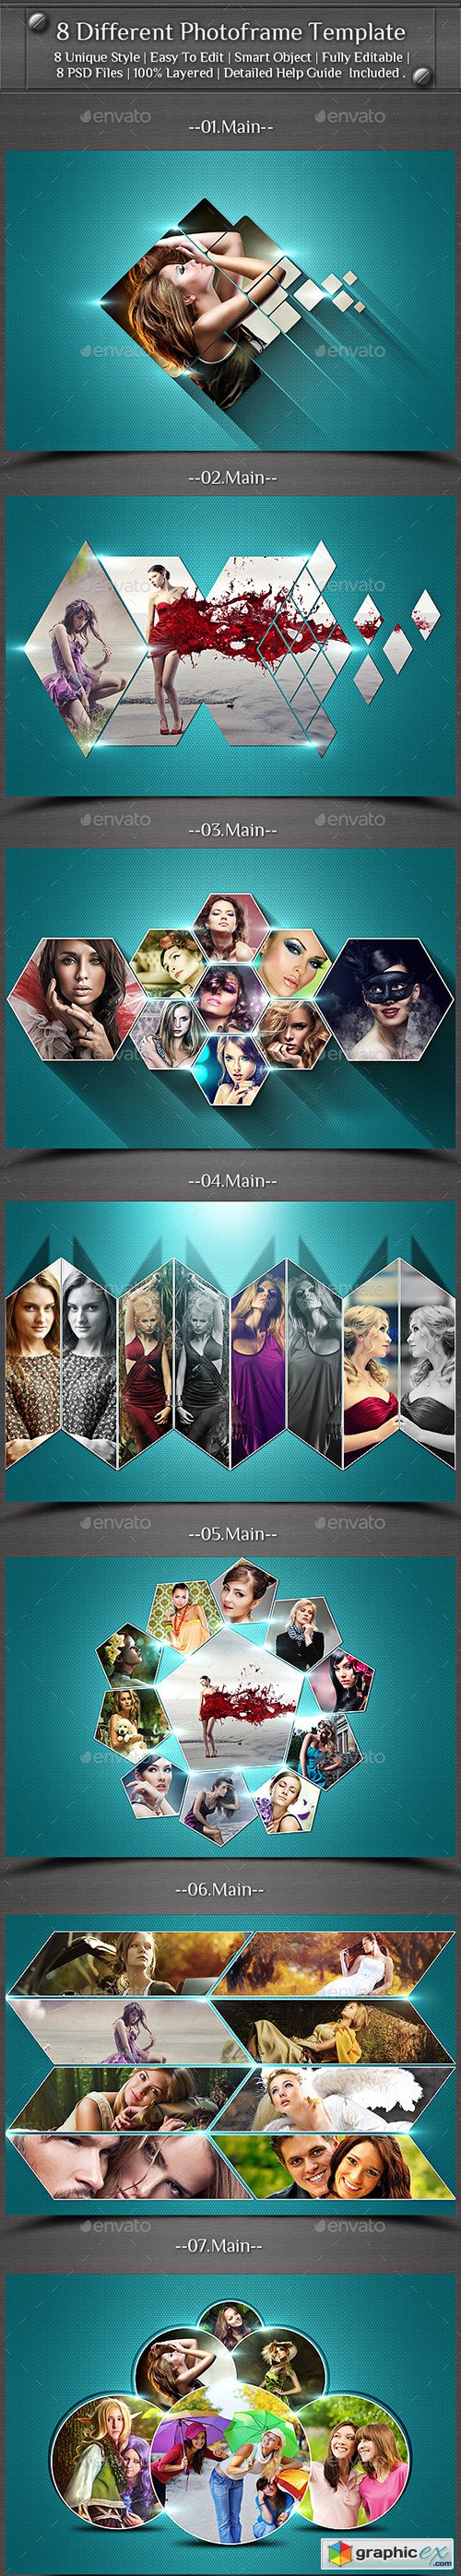 8 Different Photoframe Template